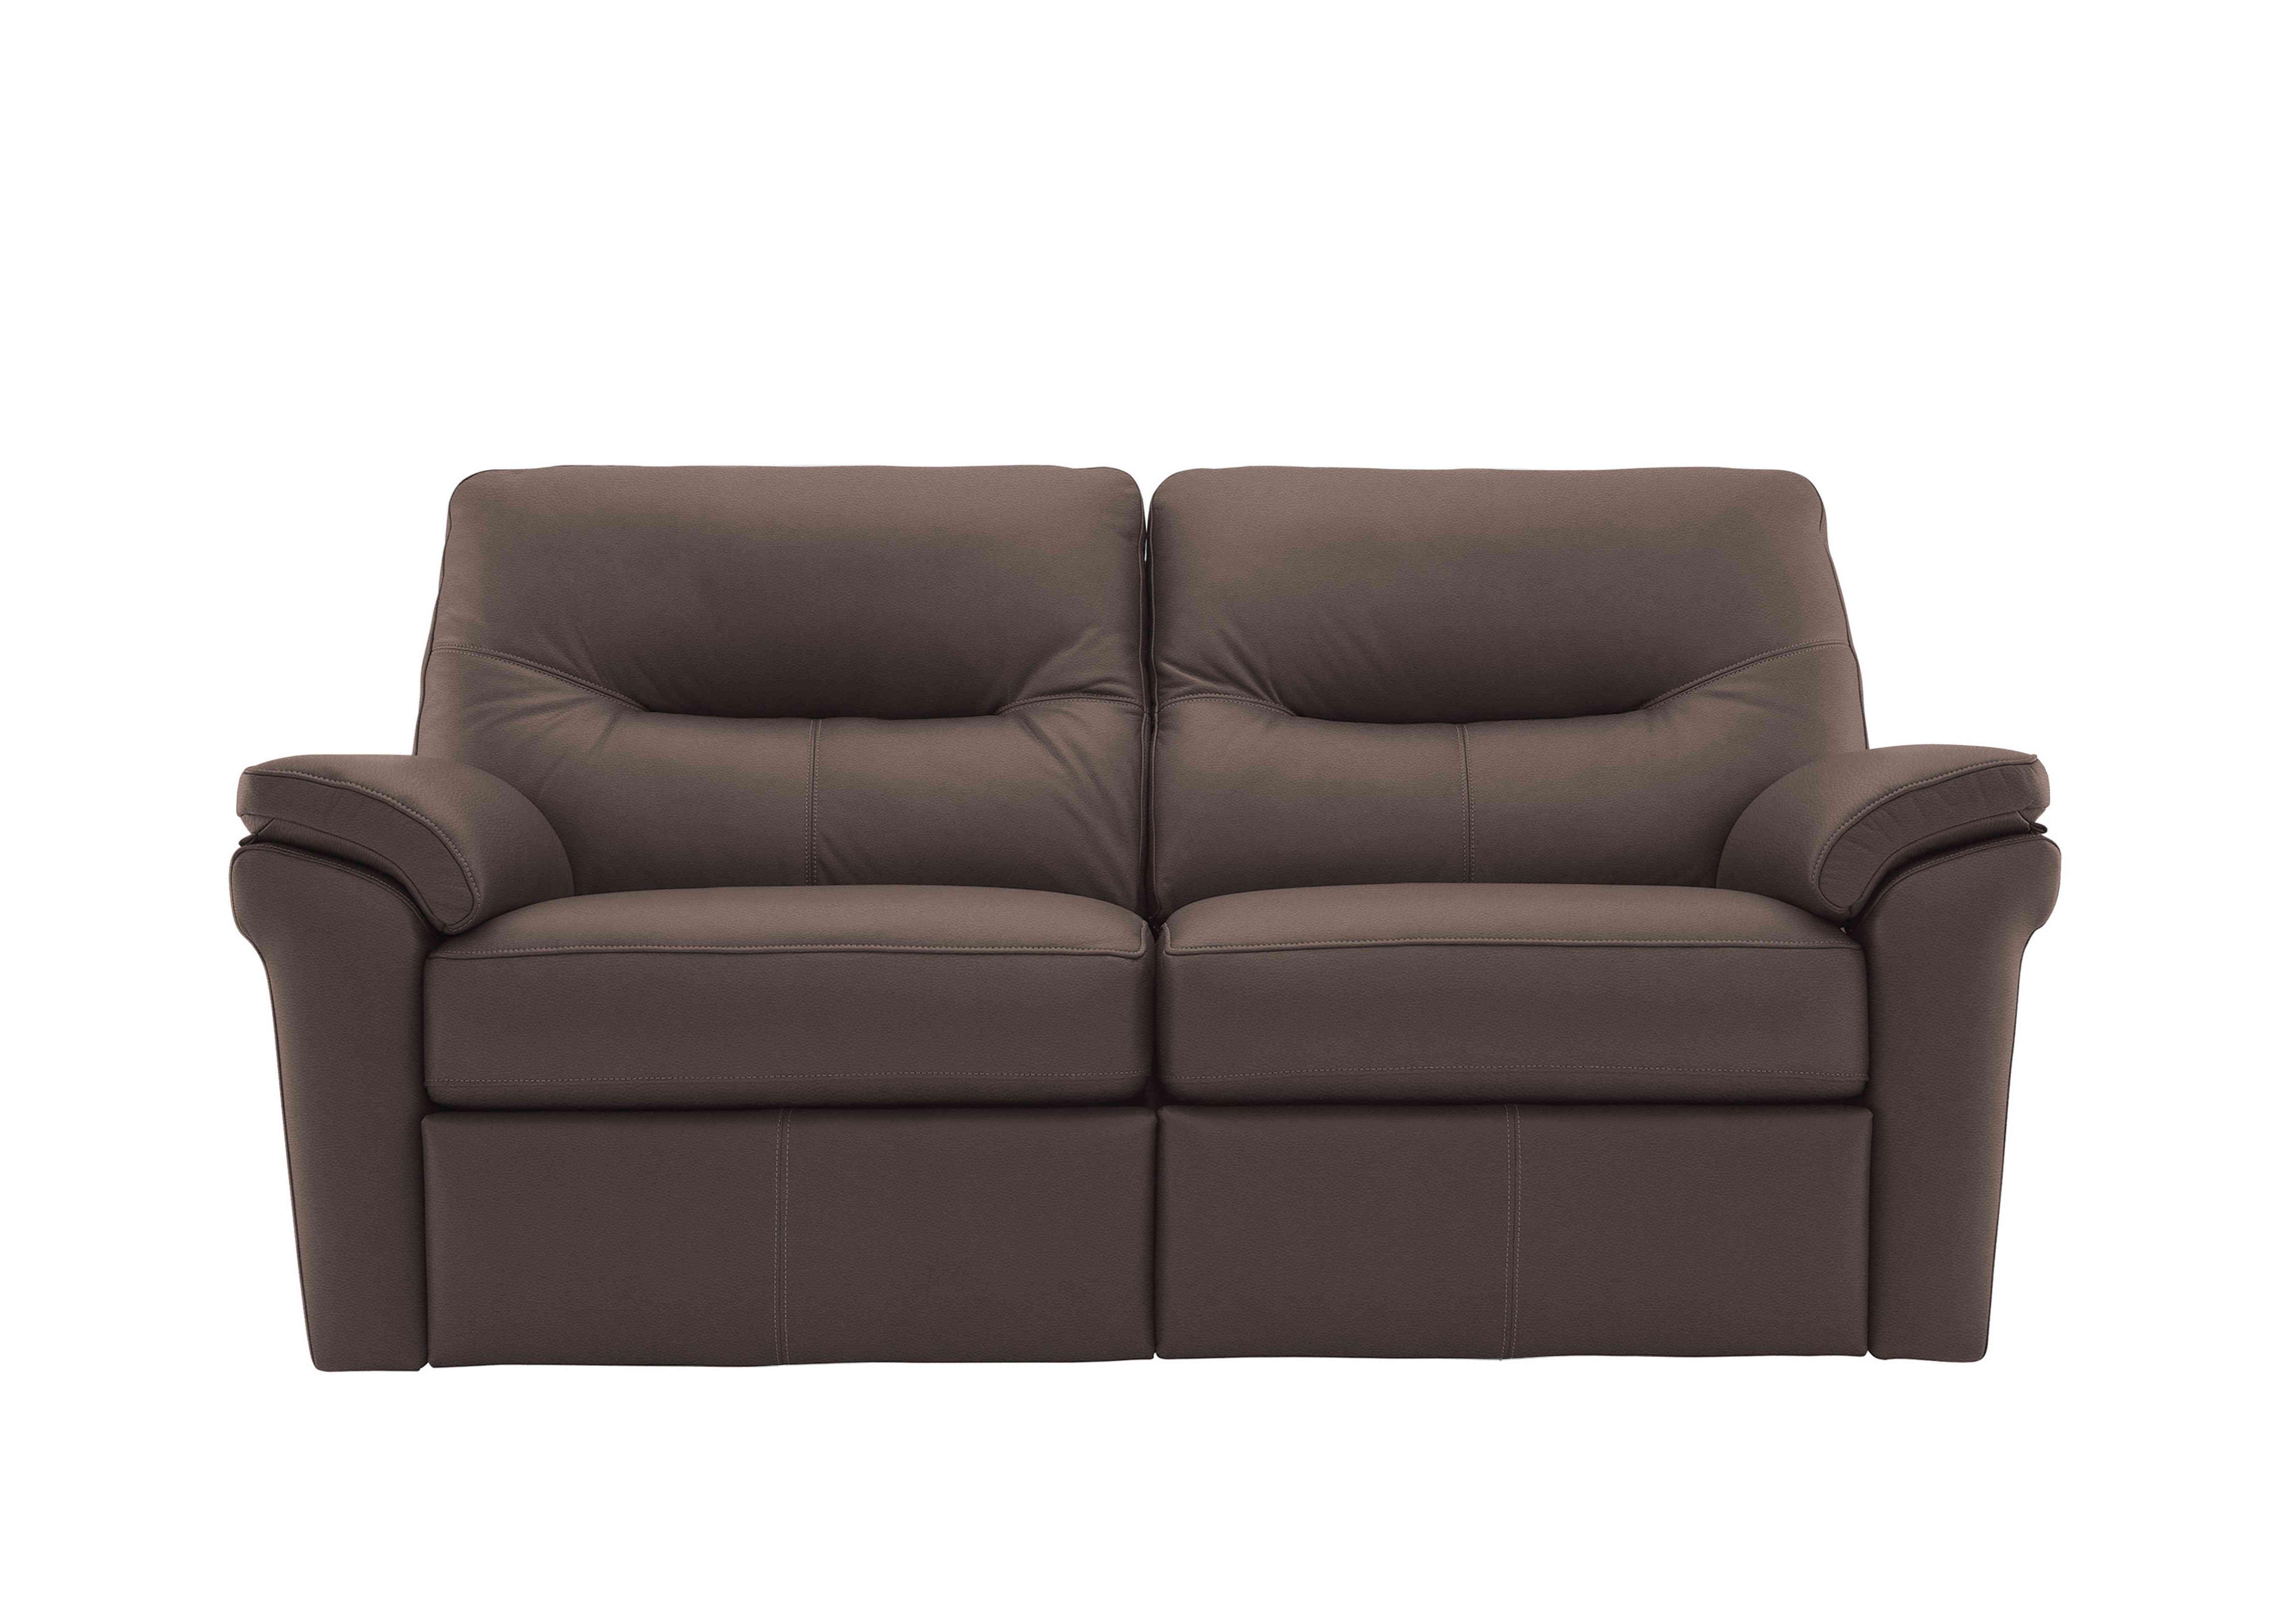 Seattle 2.5 Seater Leather Sofa in H003 Oxford Chocolate on Furniture Village